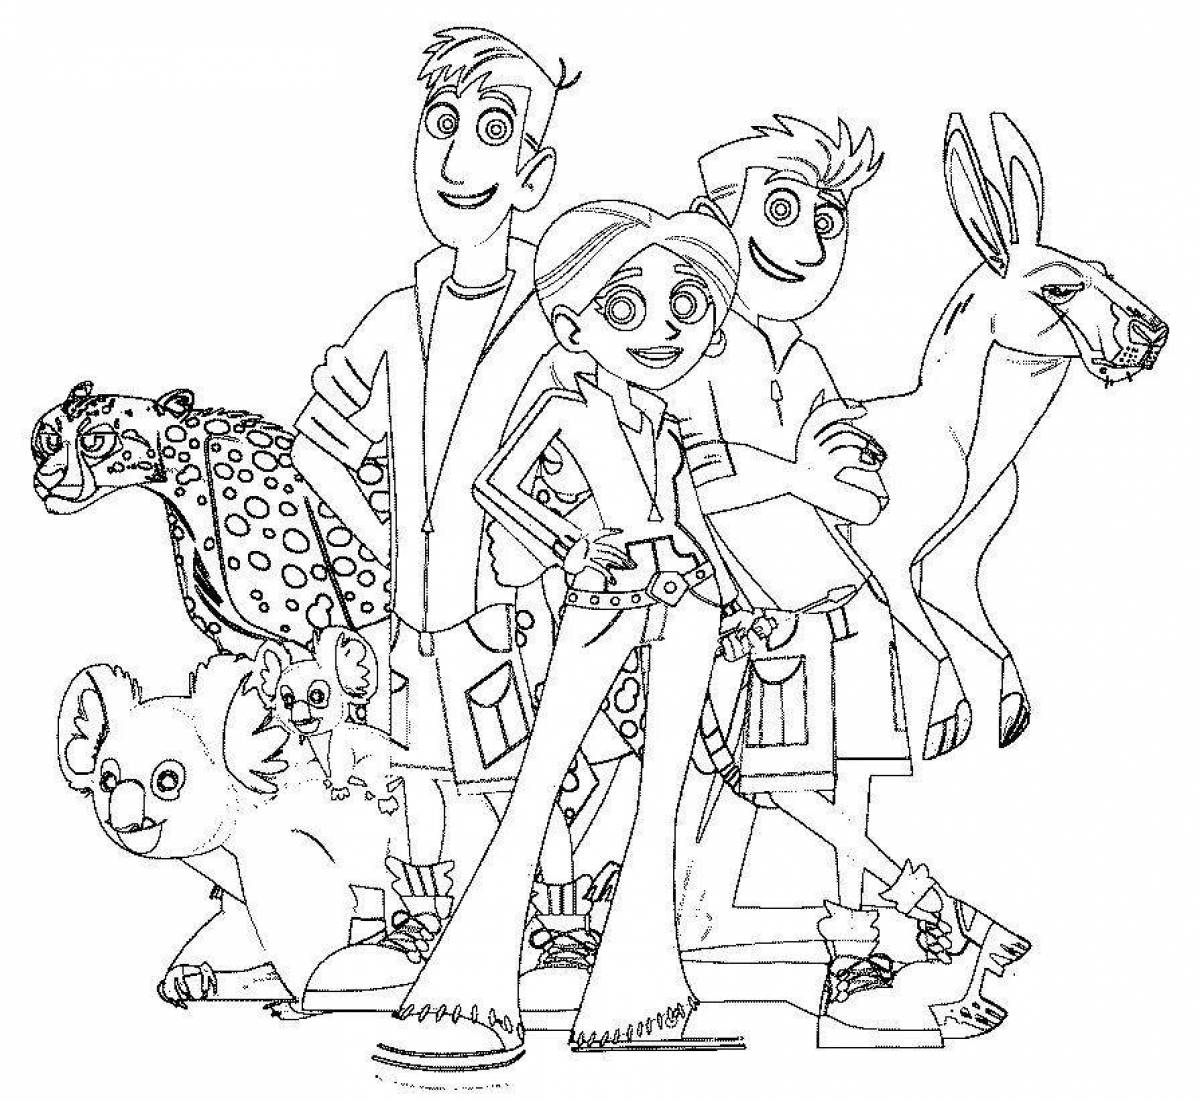 Animated kratt brothers coloring page